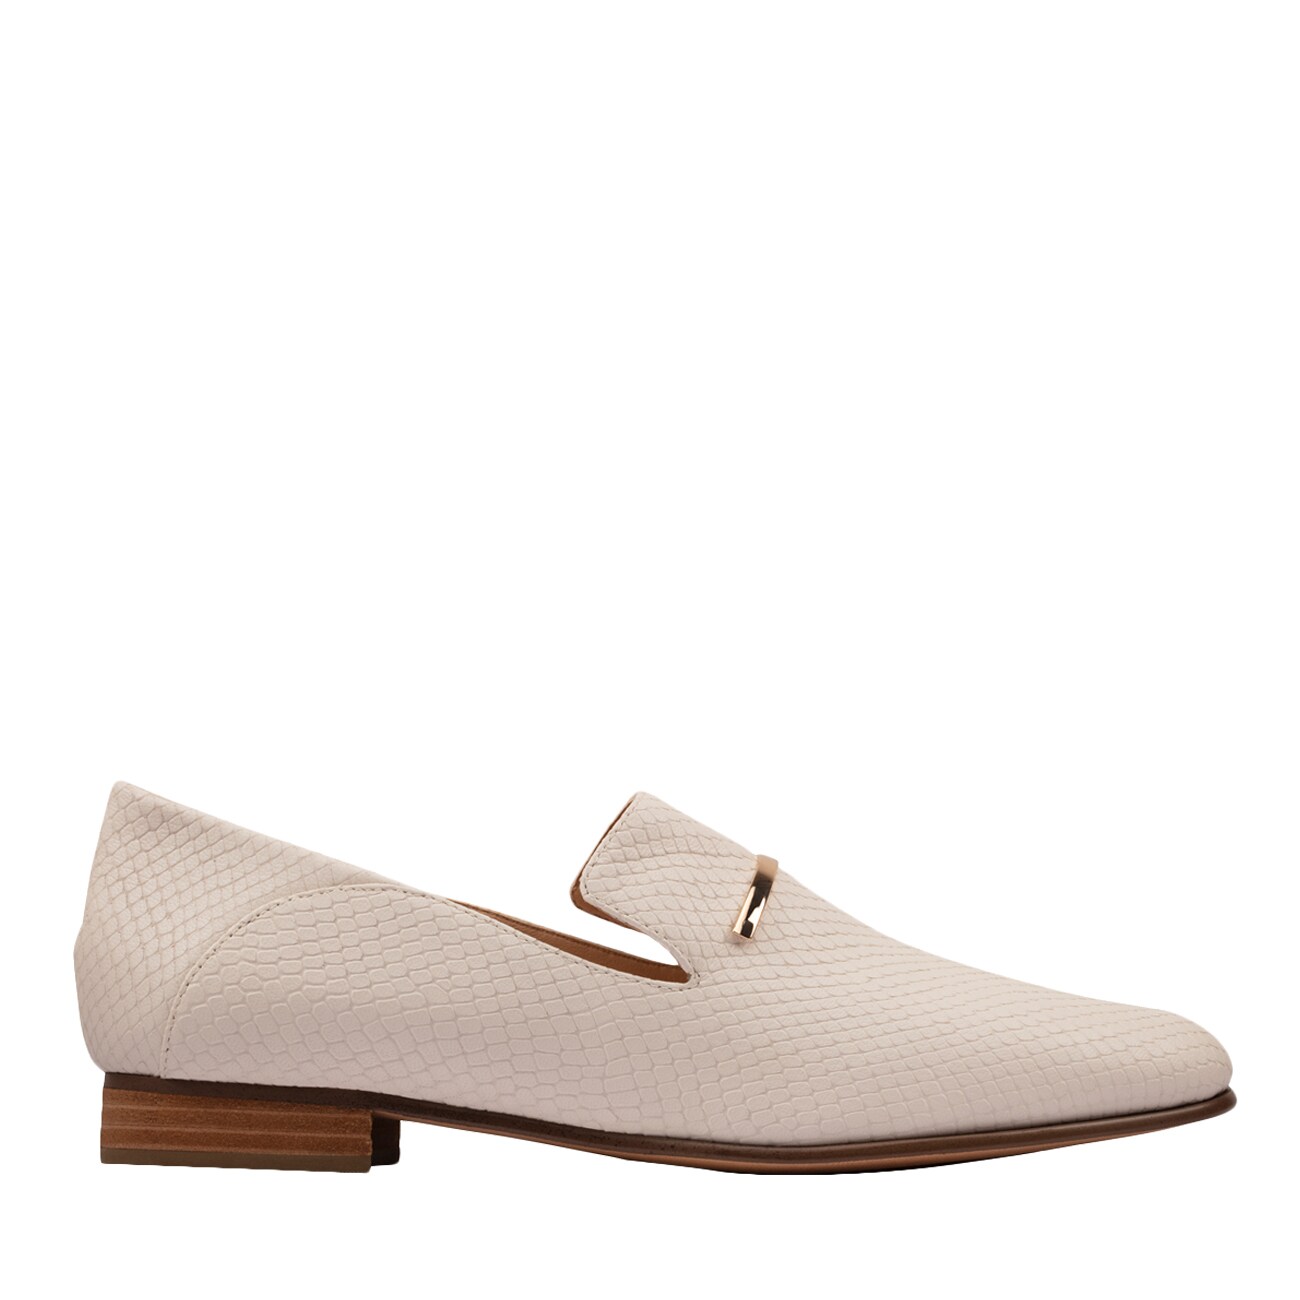 clarks shoes ladies loafers